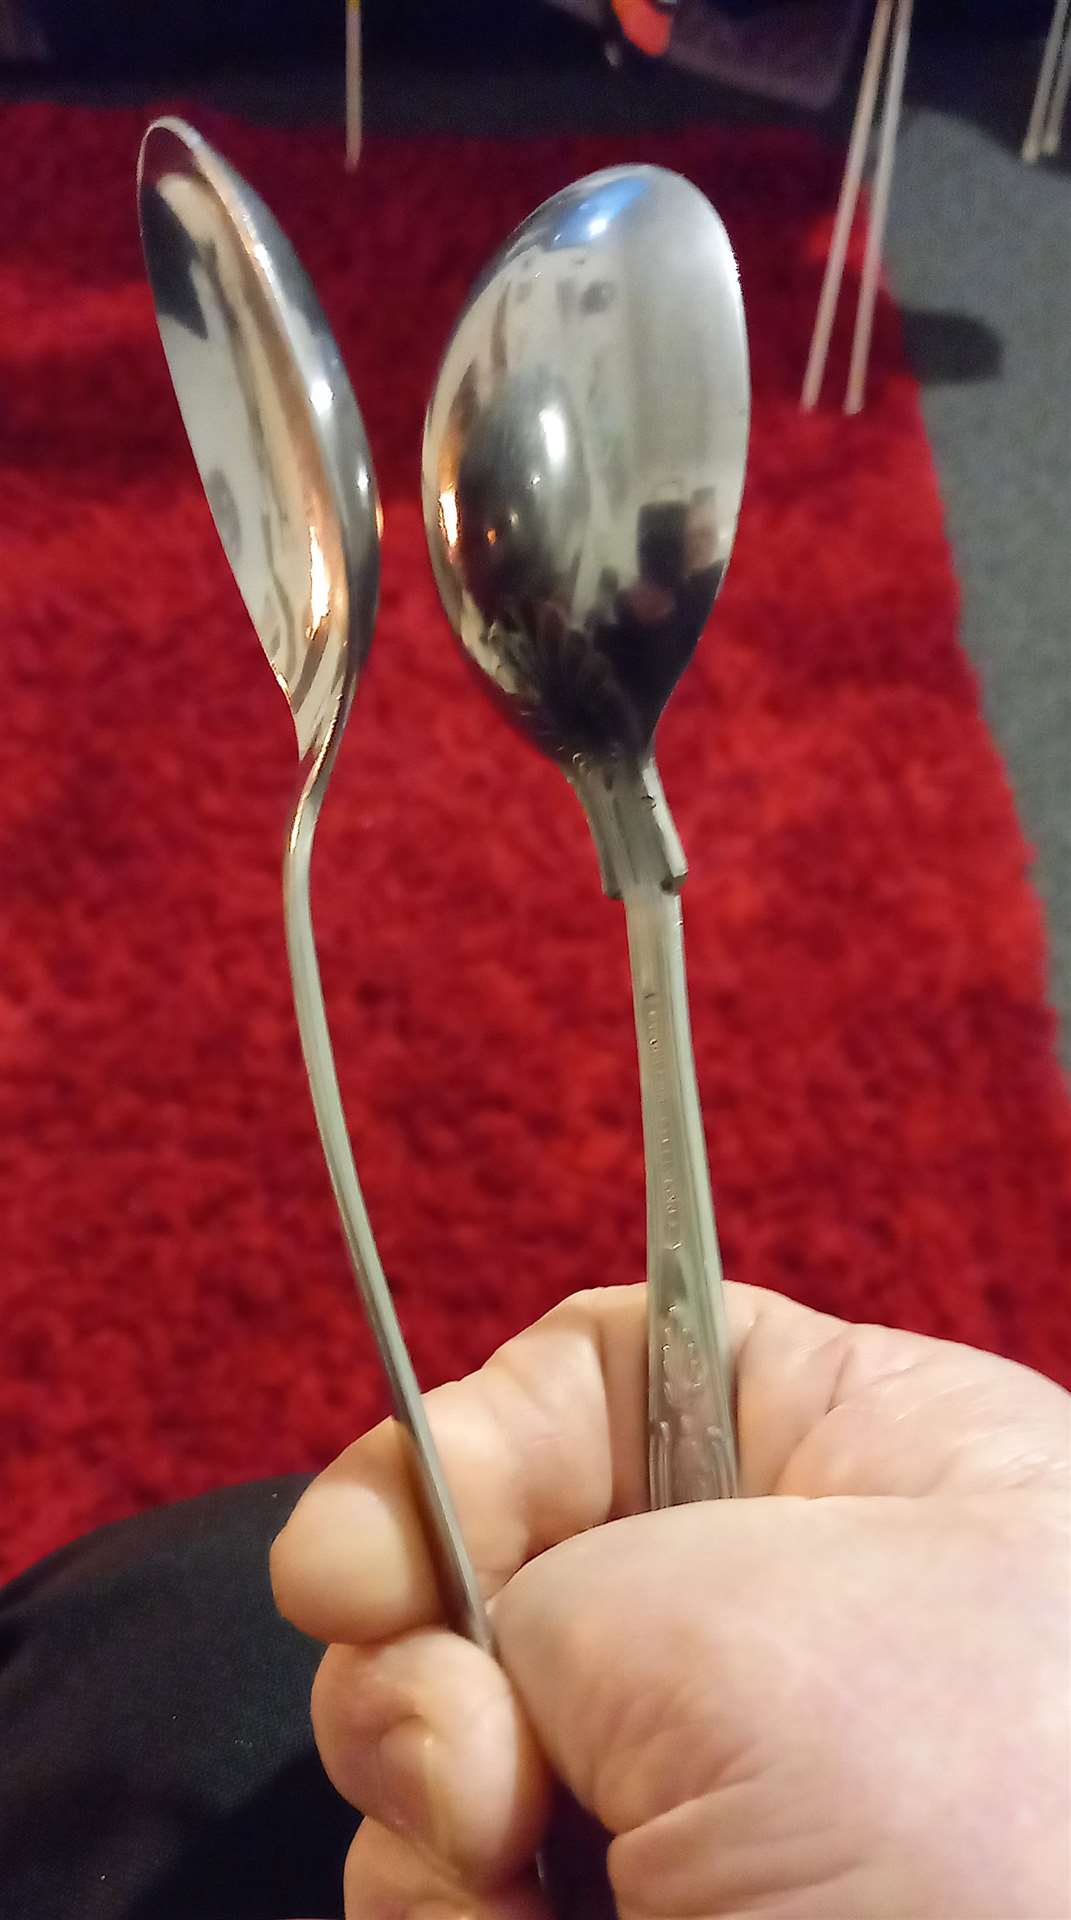 Willie's spoons were bought for 10p each in a local charity shop. In this photo he shows how to hold them.